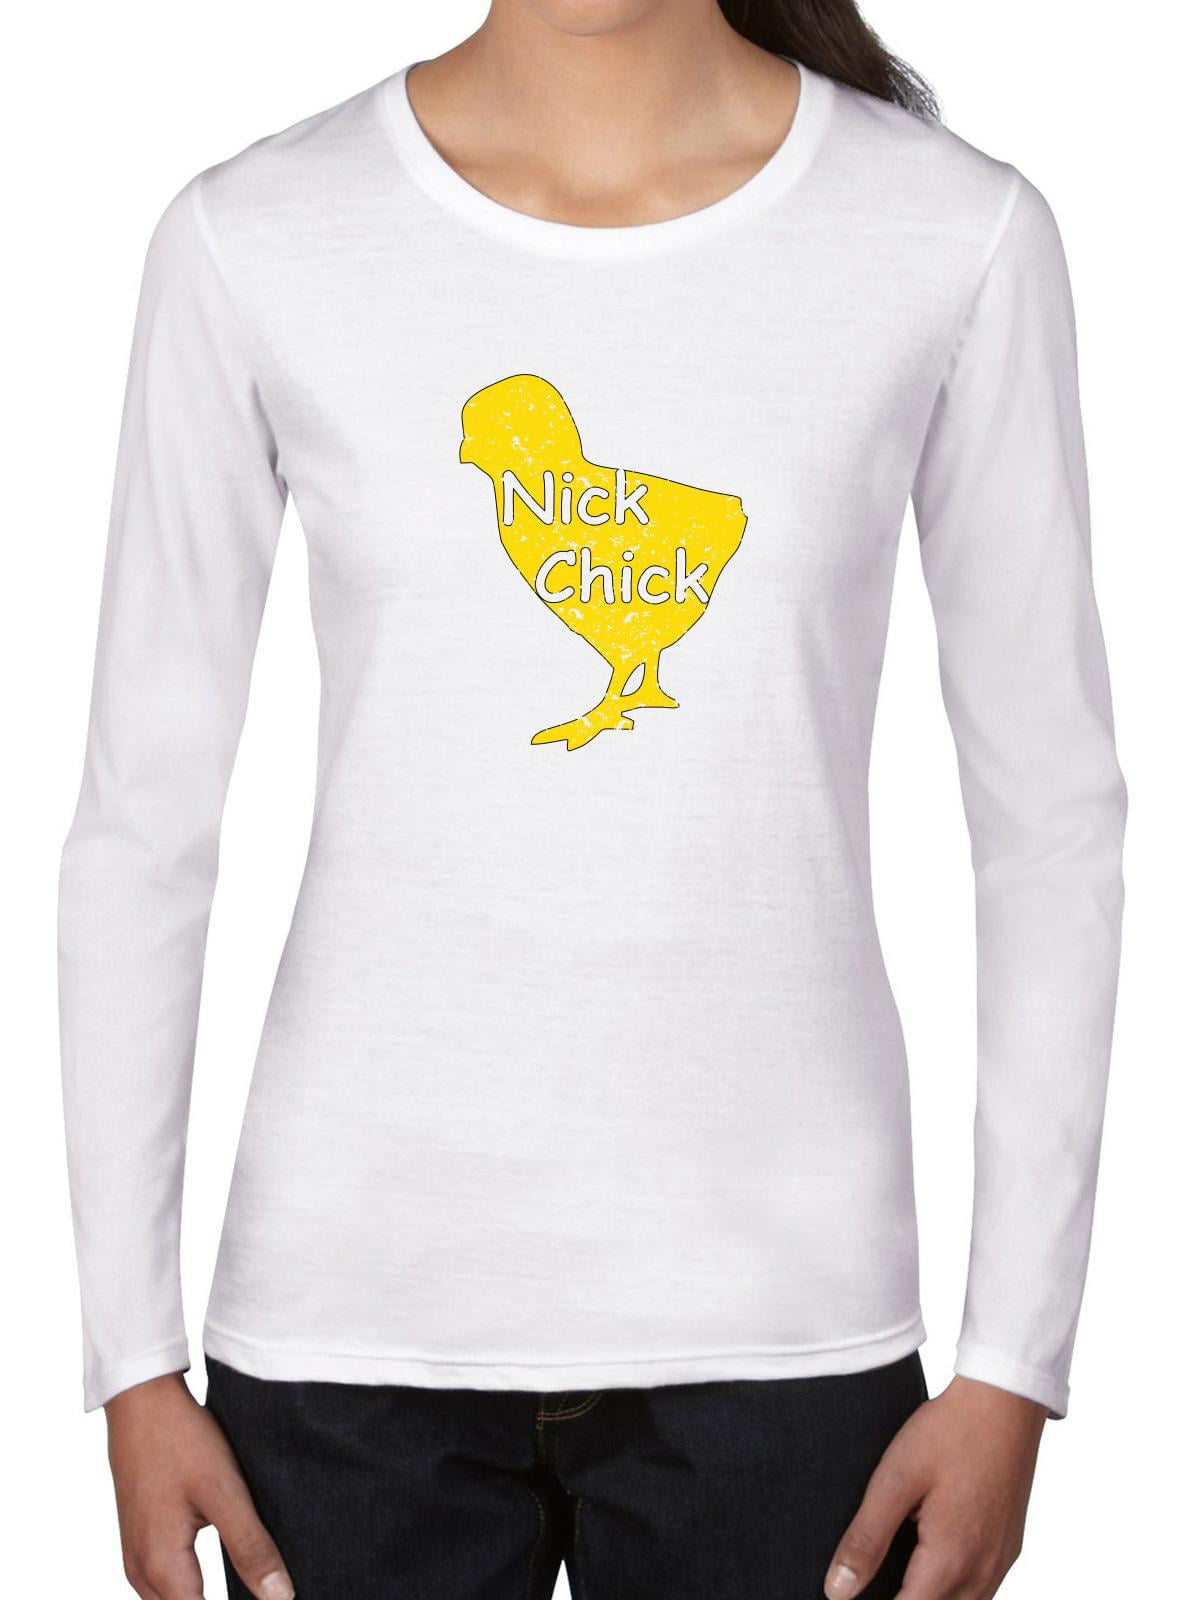 Yellow Chickens Baby Boys Girls Casual Long Sleeve T Shirts Moisture Wicking Athletic Tee Graphic Tops